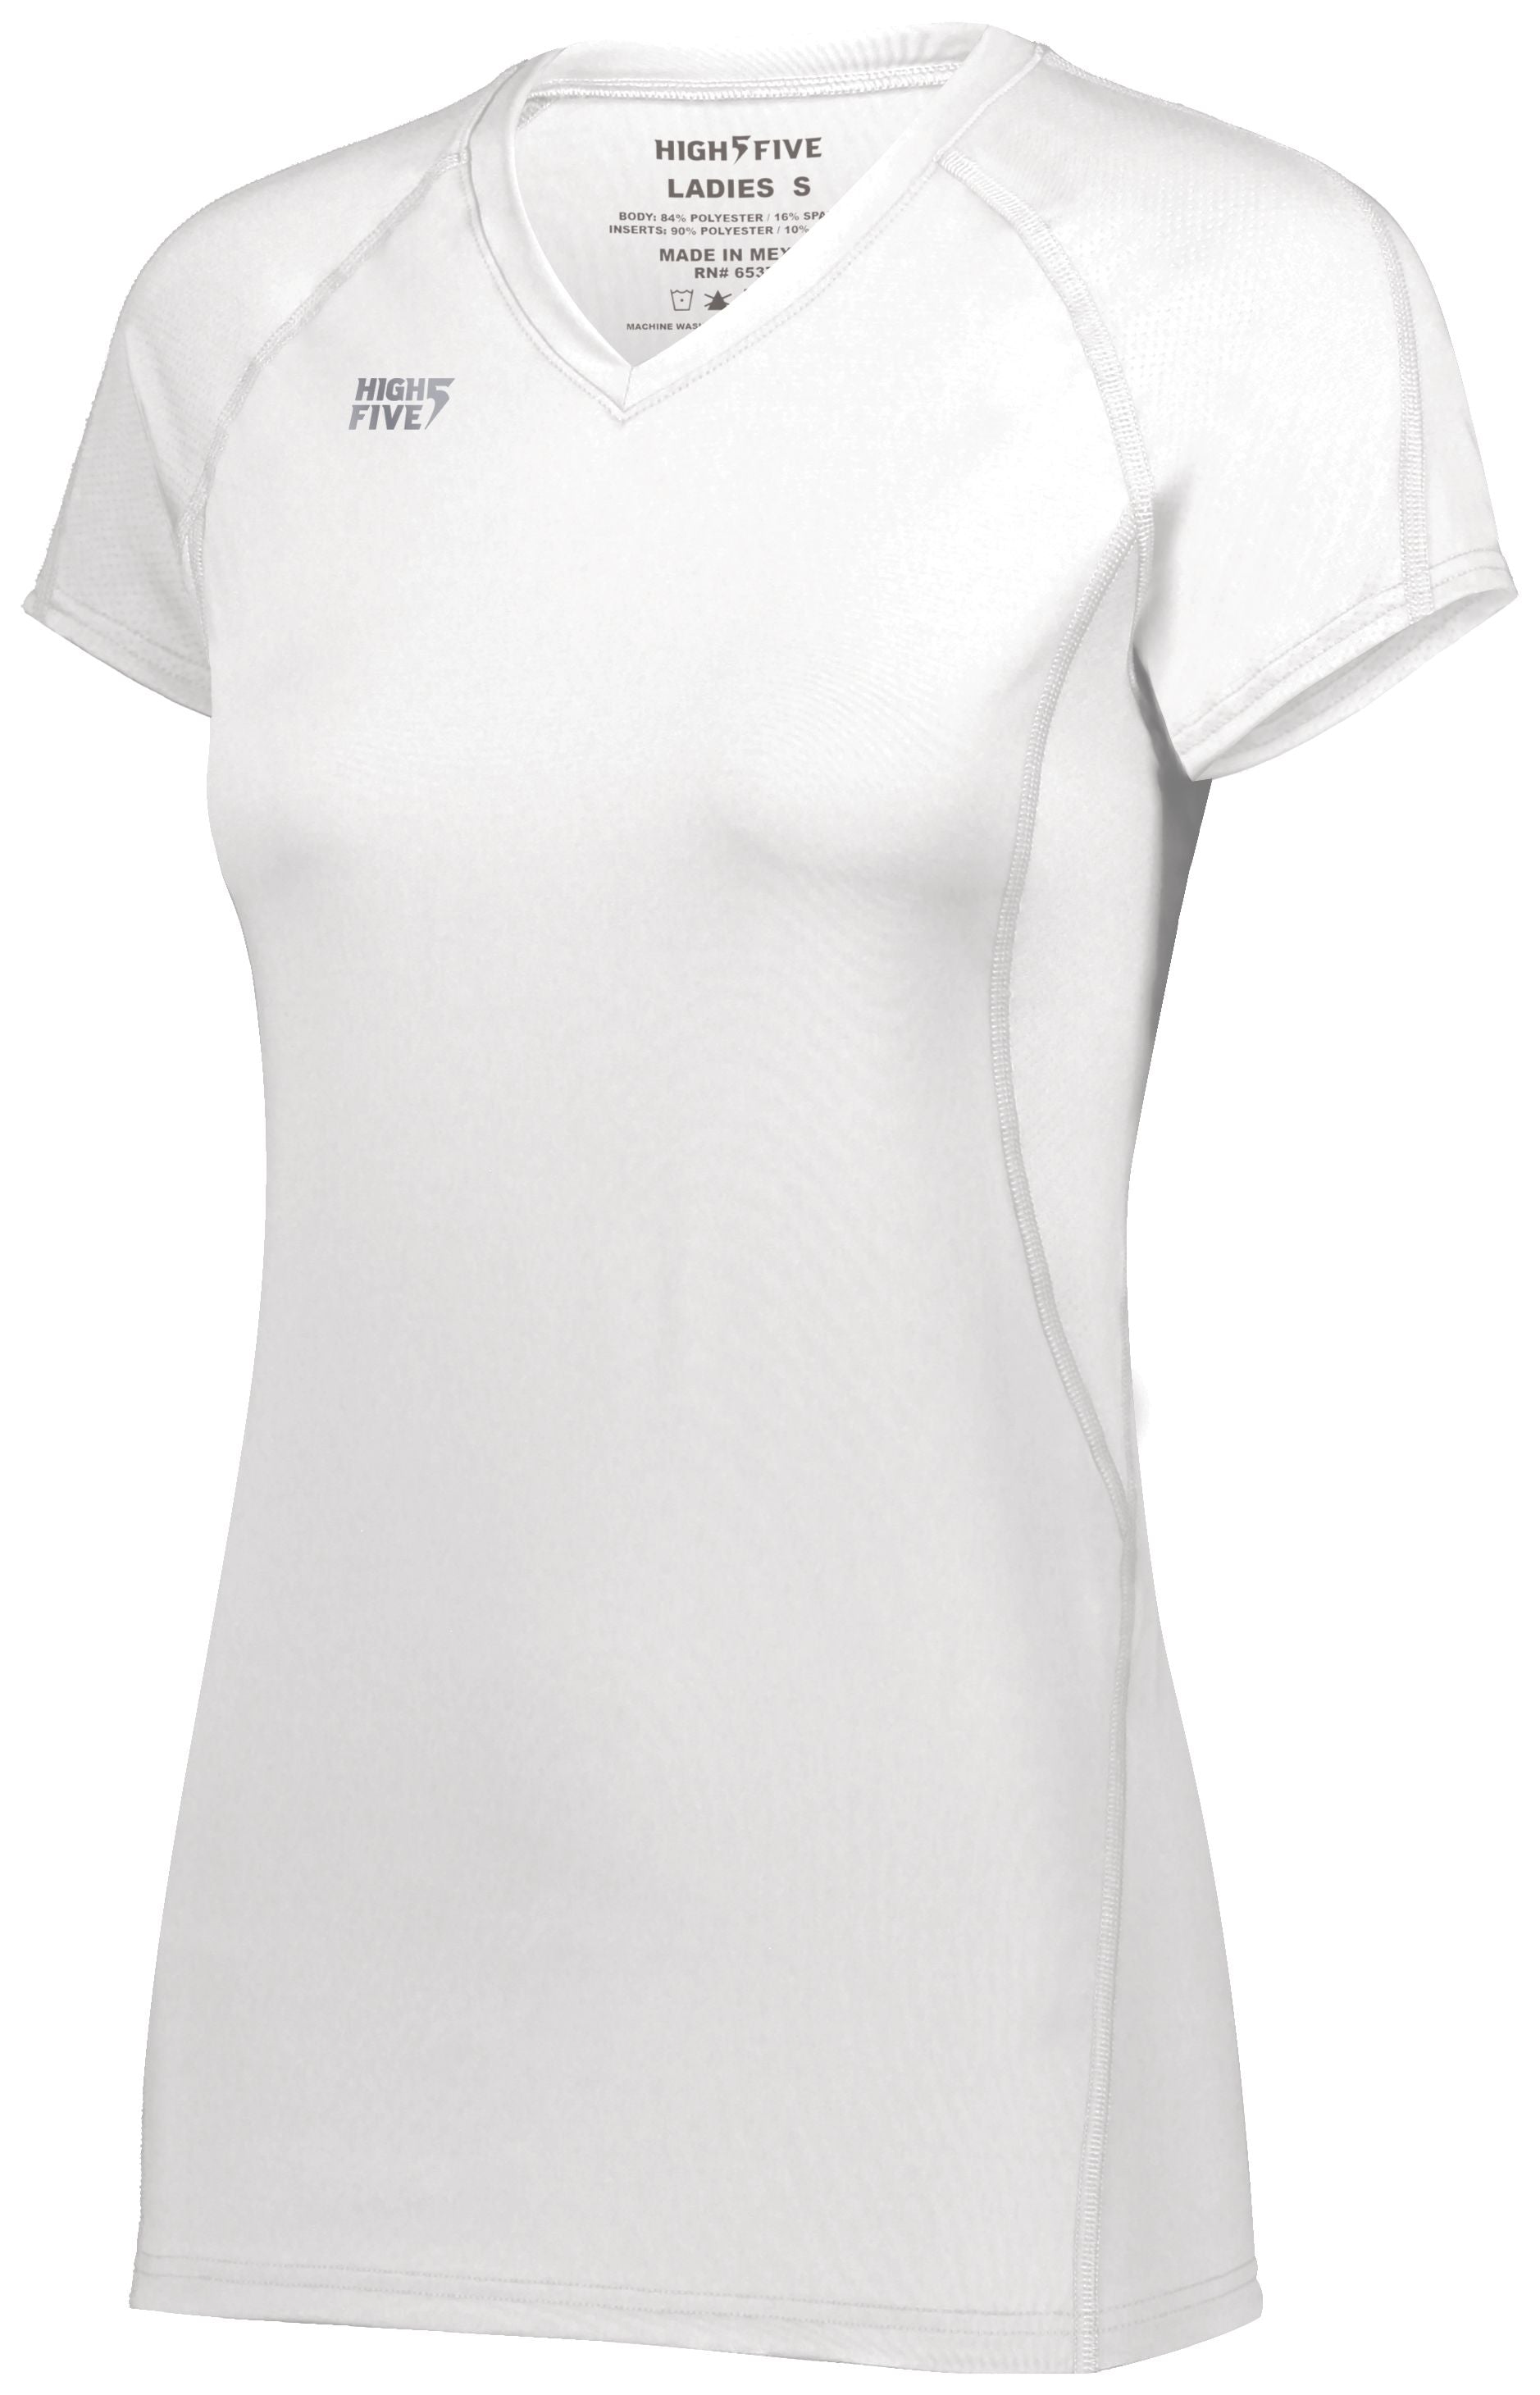 High 5 Girls Truhit Short Sleeve Jersey in White  -Part of the Girls, High5-Products, Volleyball, Girls-Jersey, Shirts product lines at KanaleyCreations.com